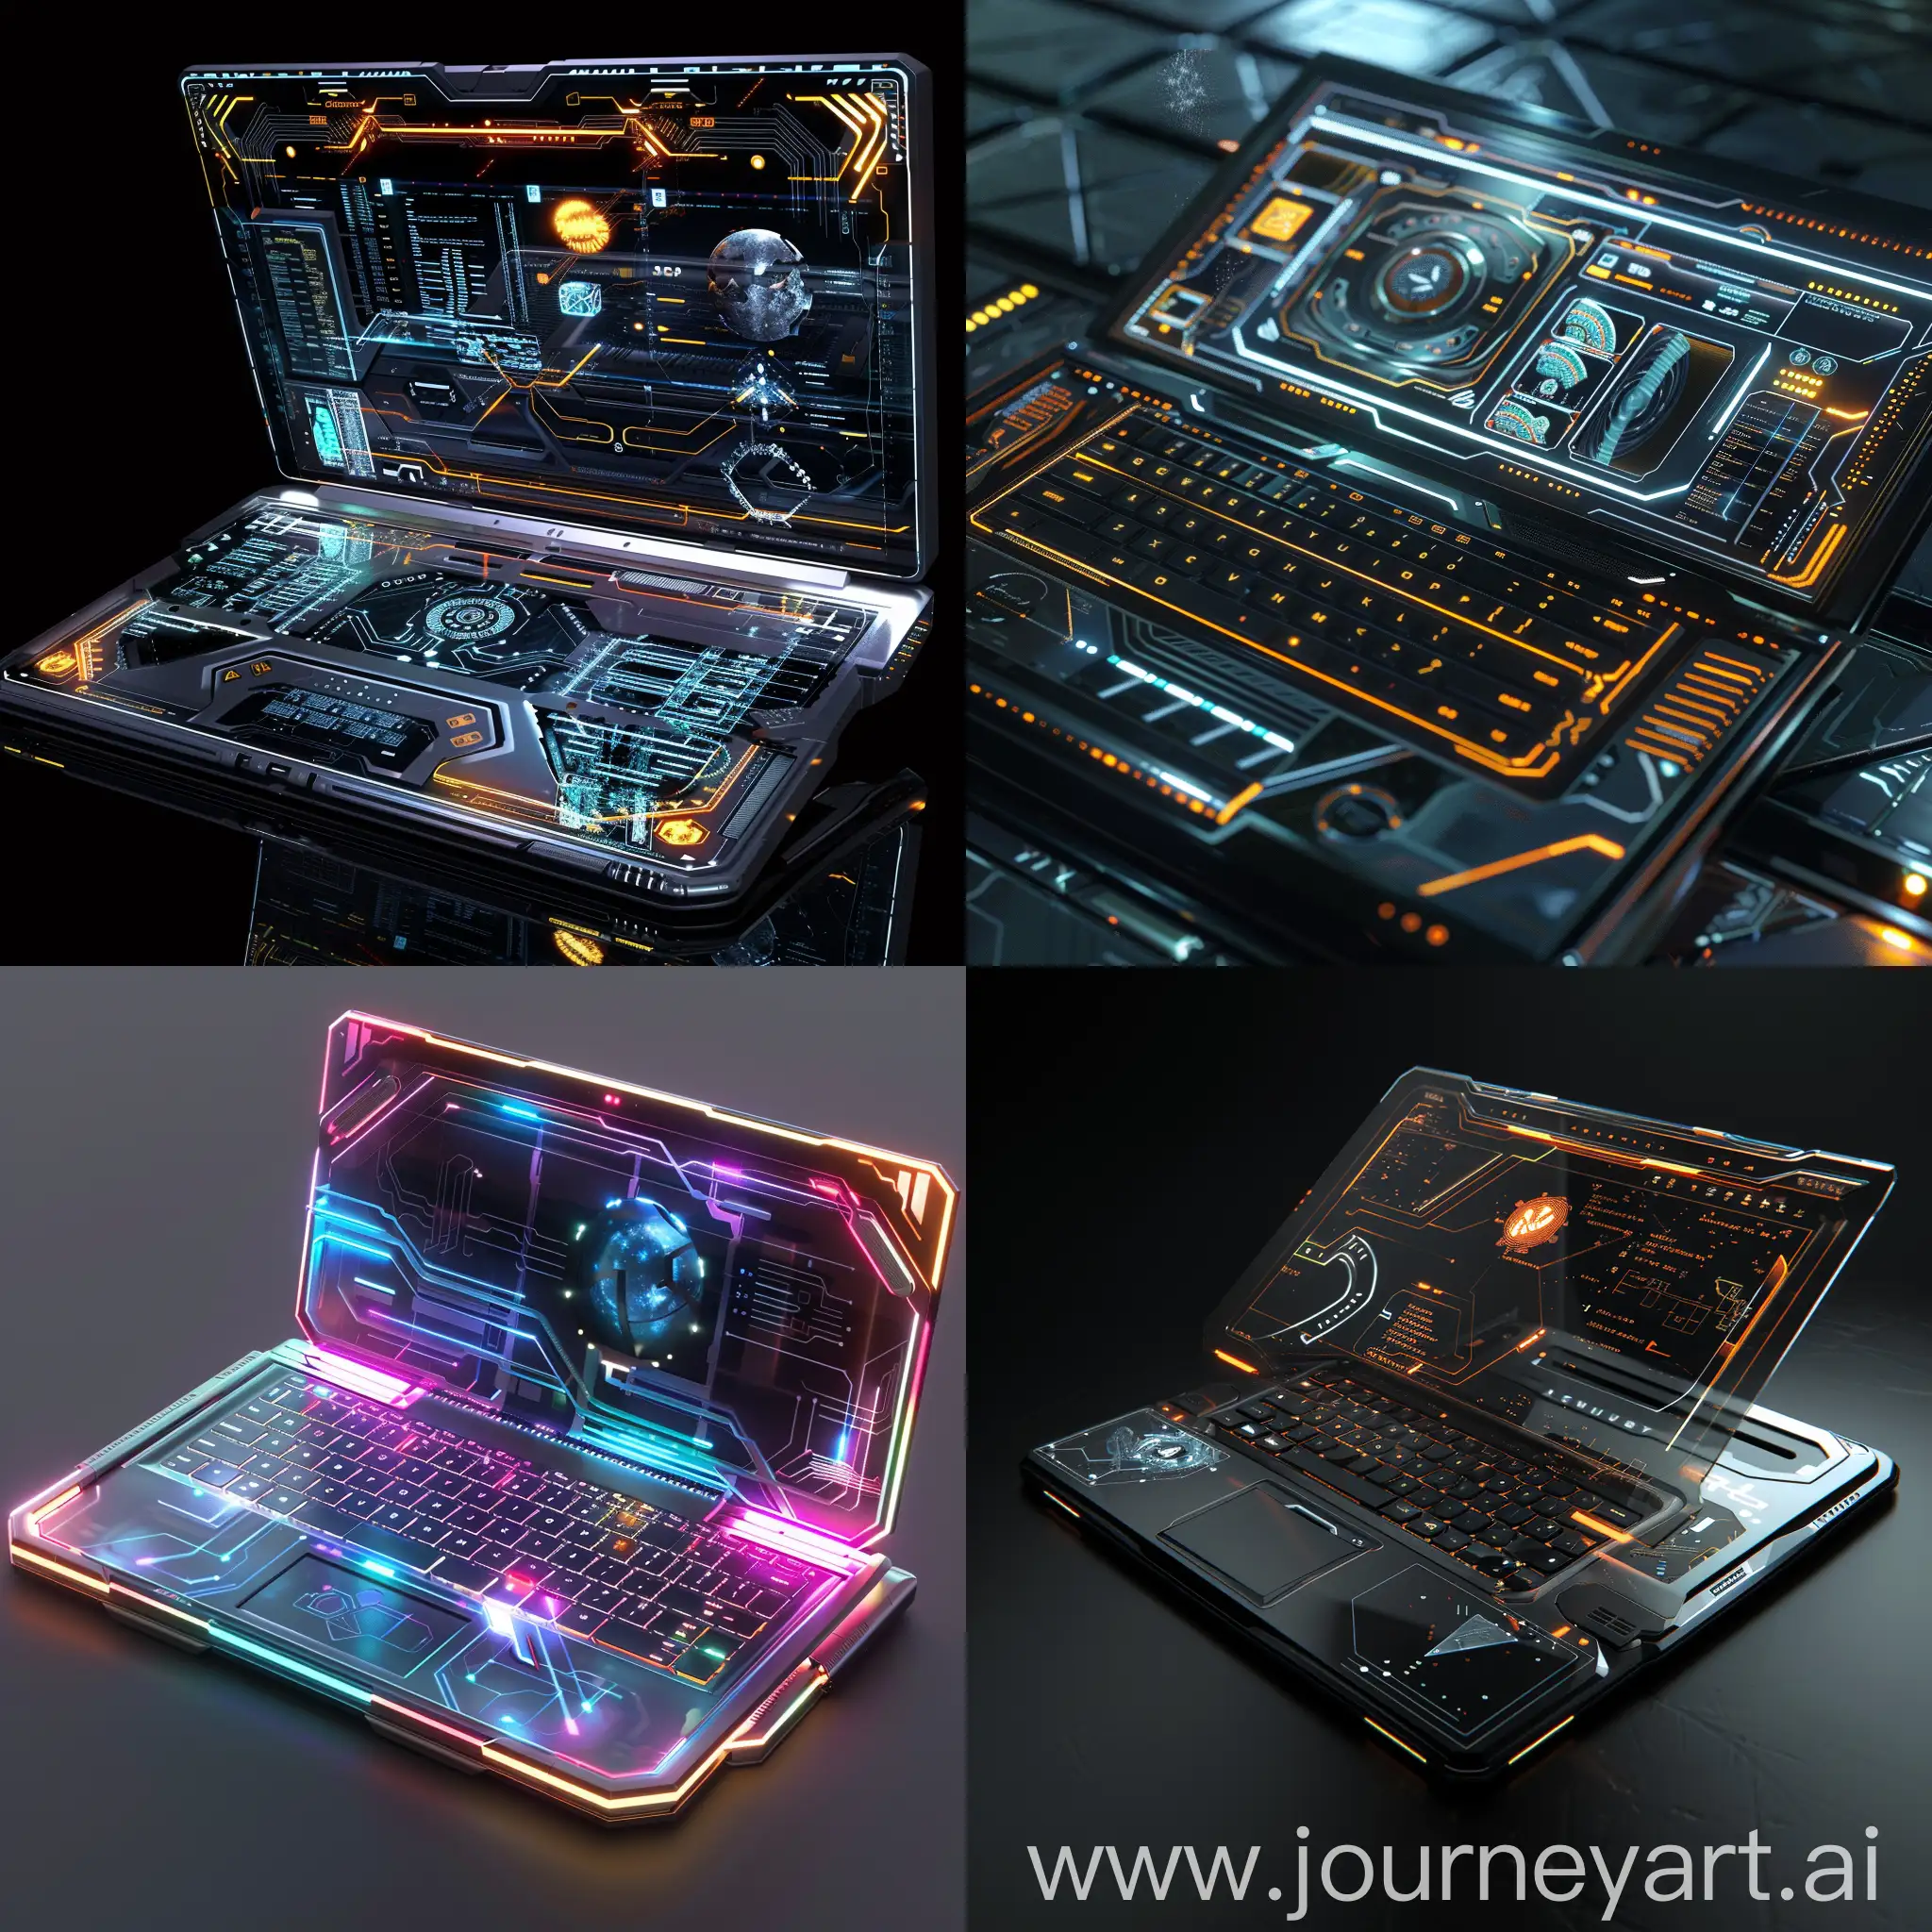 Advanced-SciFi-Laptop-with-Quantum-Processing-Units-and-Holographic-Displays